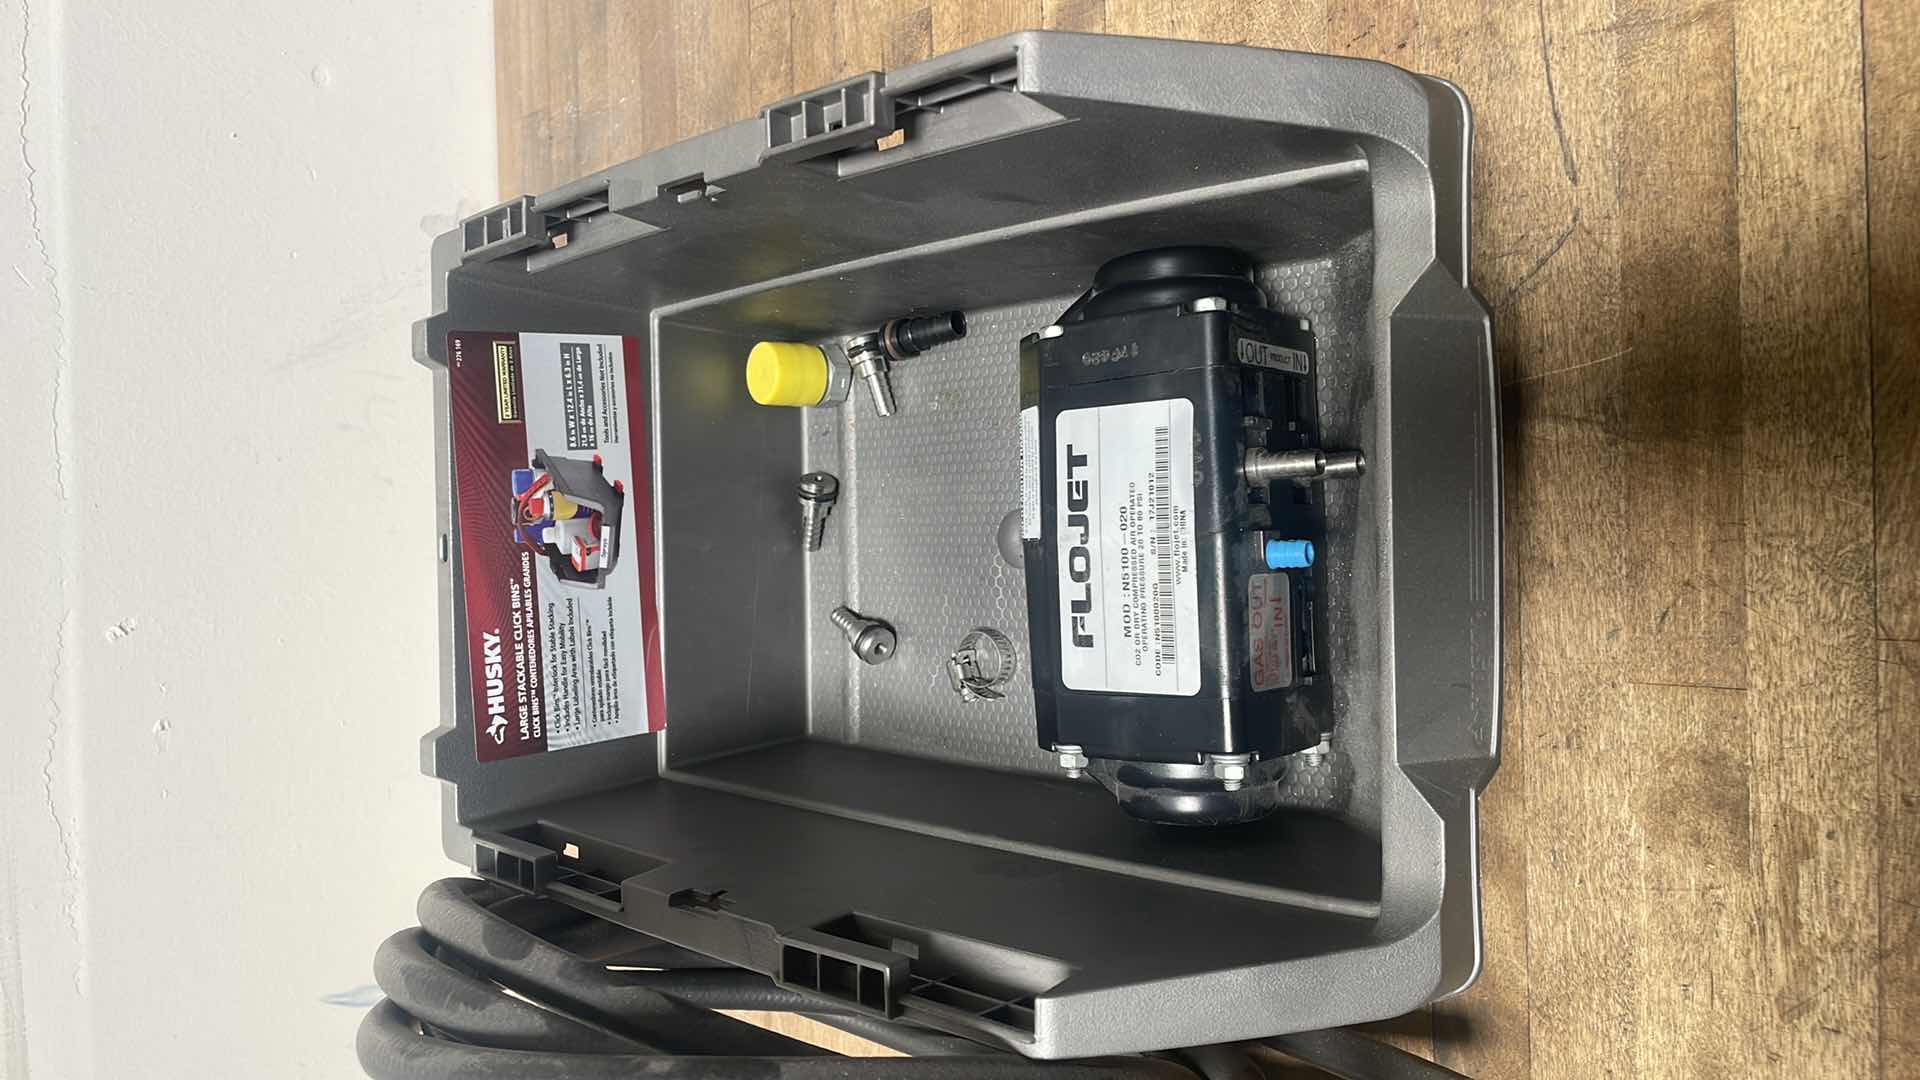 Photo 2 of FLOJET DOUBLE DIAPHRAGM PUMP: AIR, ACETAL, BOLT, 3/8 IN FLUID CONNECTION SIZE, BARBED, VITON, MODEL N5100020G WITH 1/4” HOSE &MISC. PARTS IN A HUSKY LARGE STACKABLE CLICK BIN